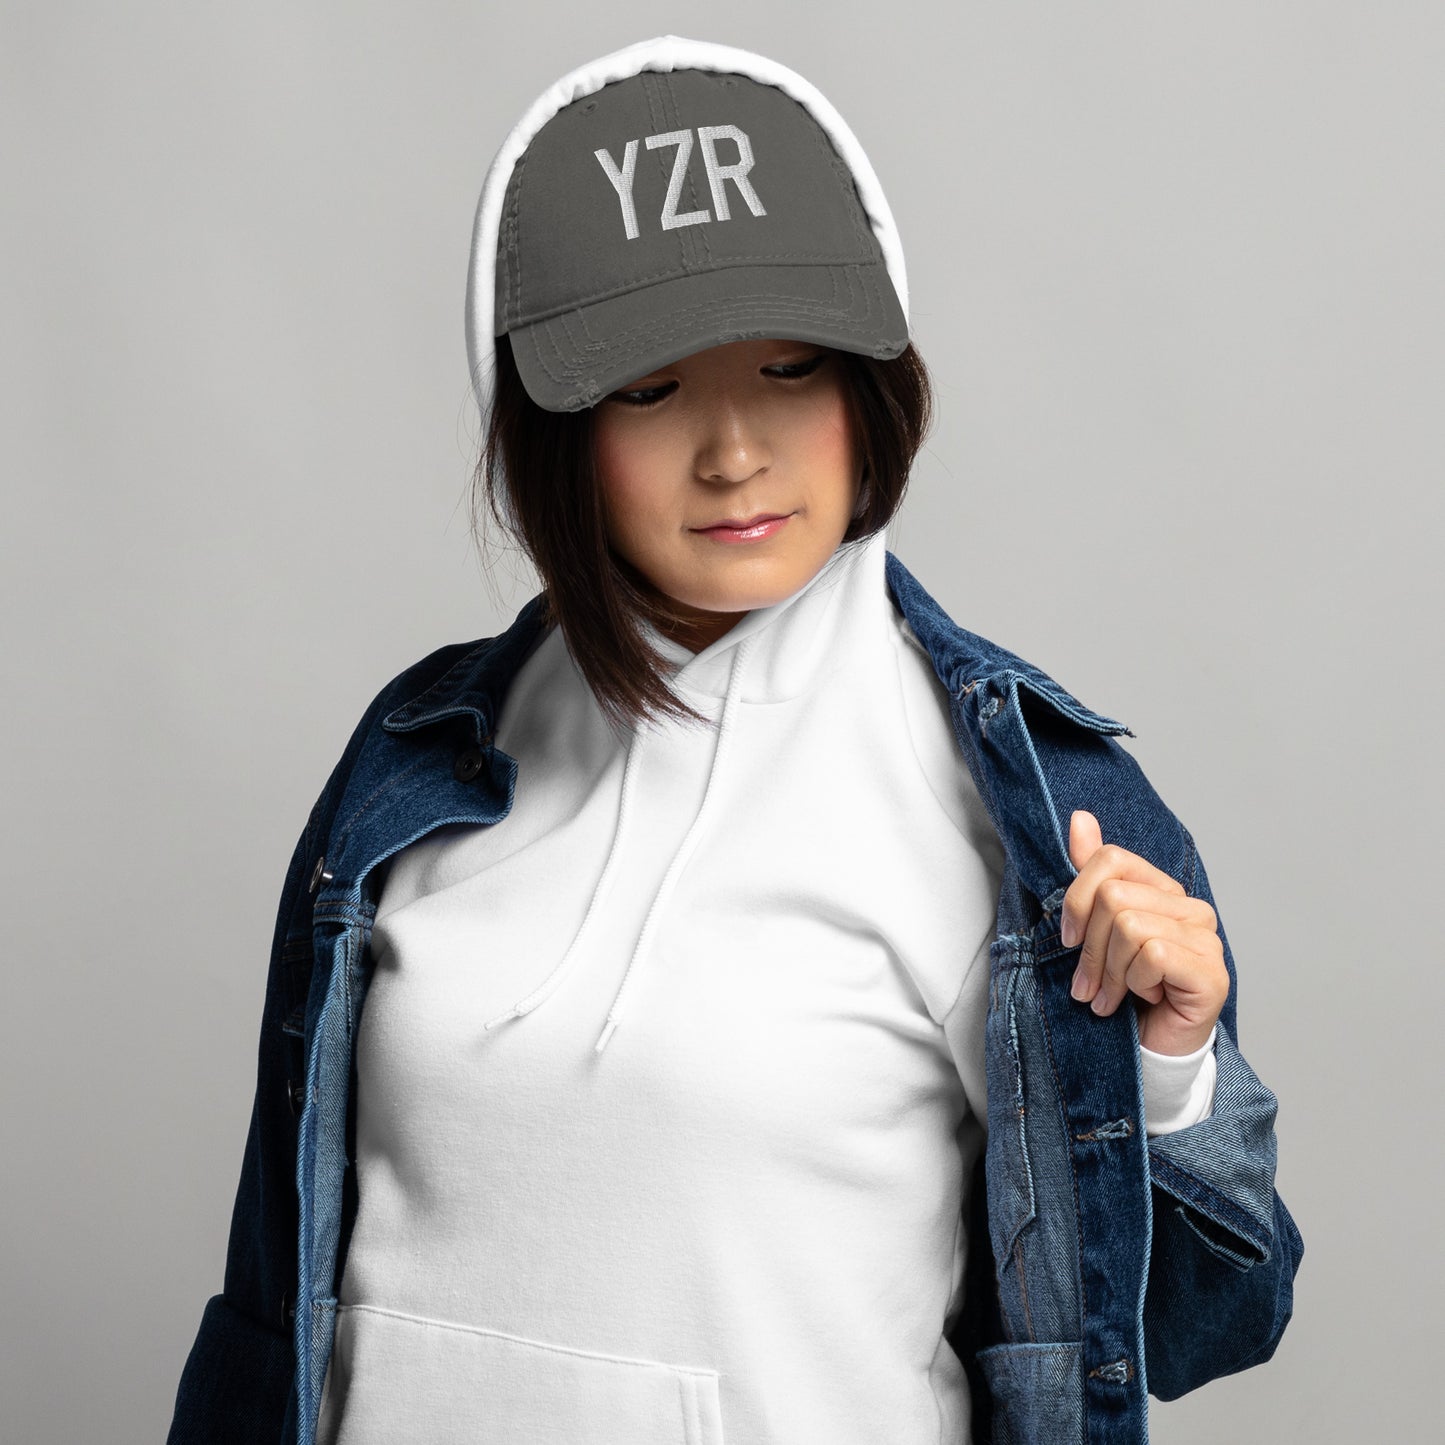 Airport Code Distressed Hat - White • YZR Sarnia • YHM Designs - Image 06